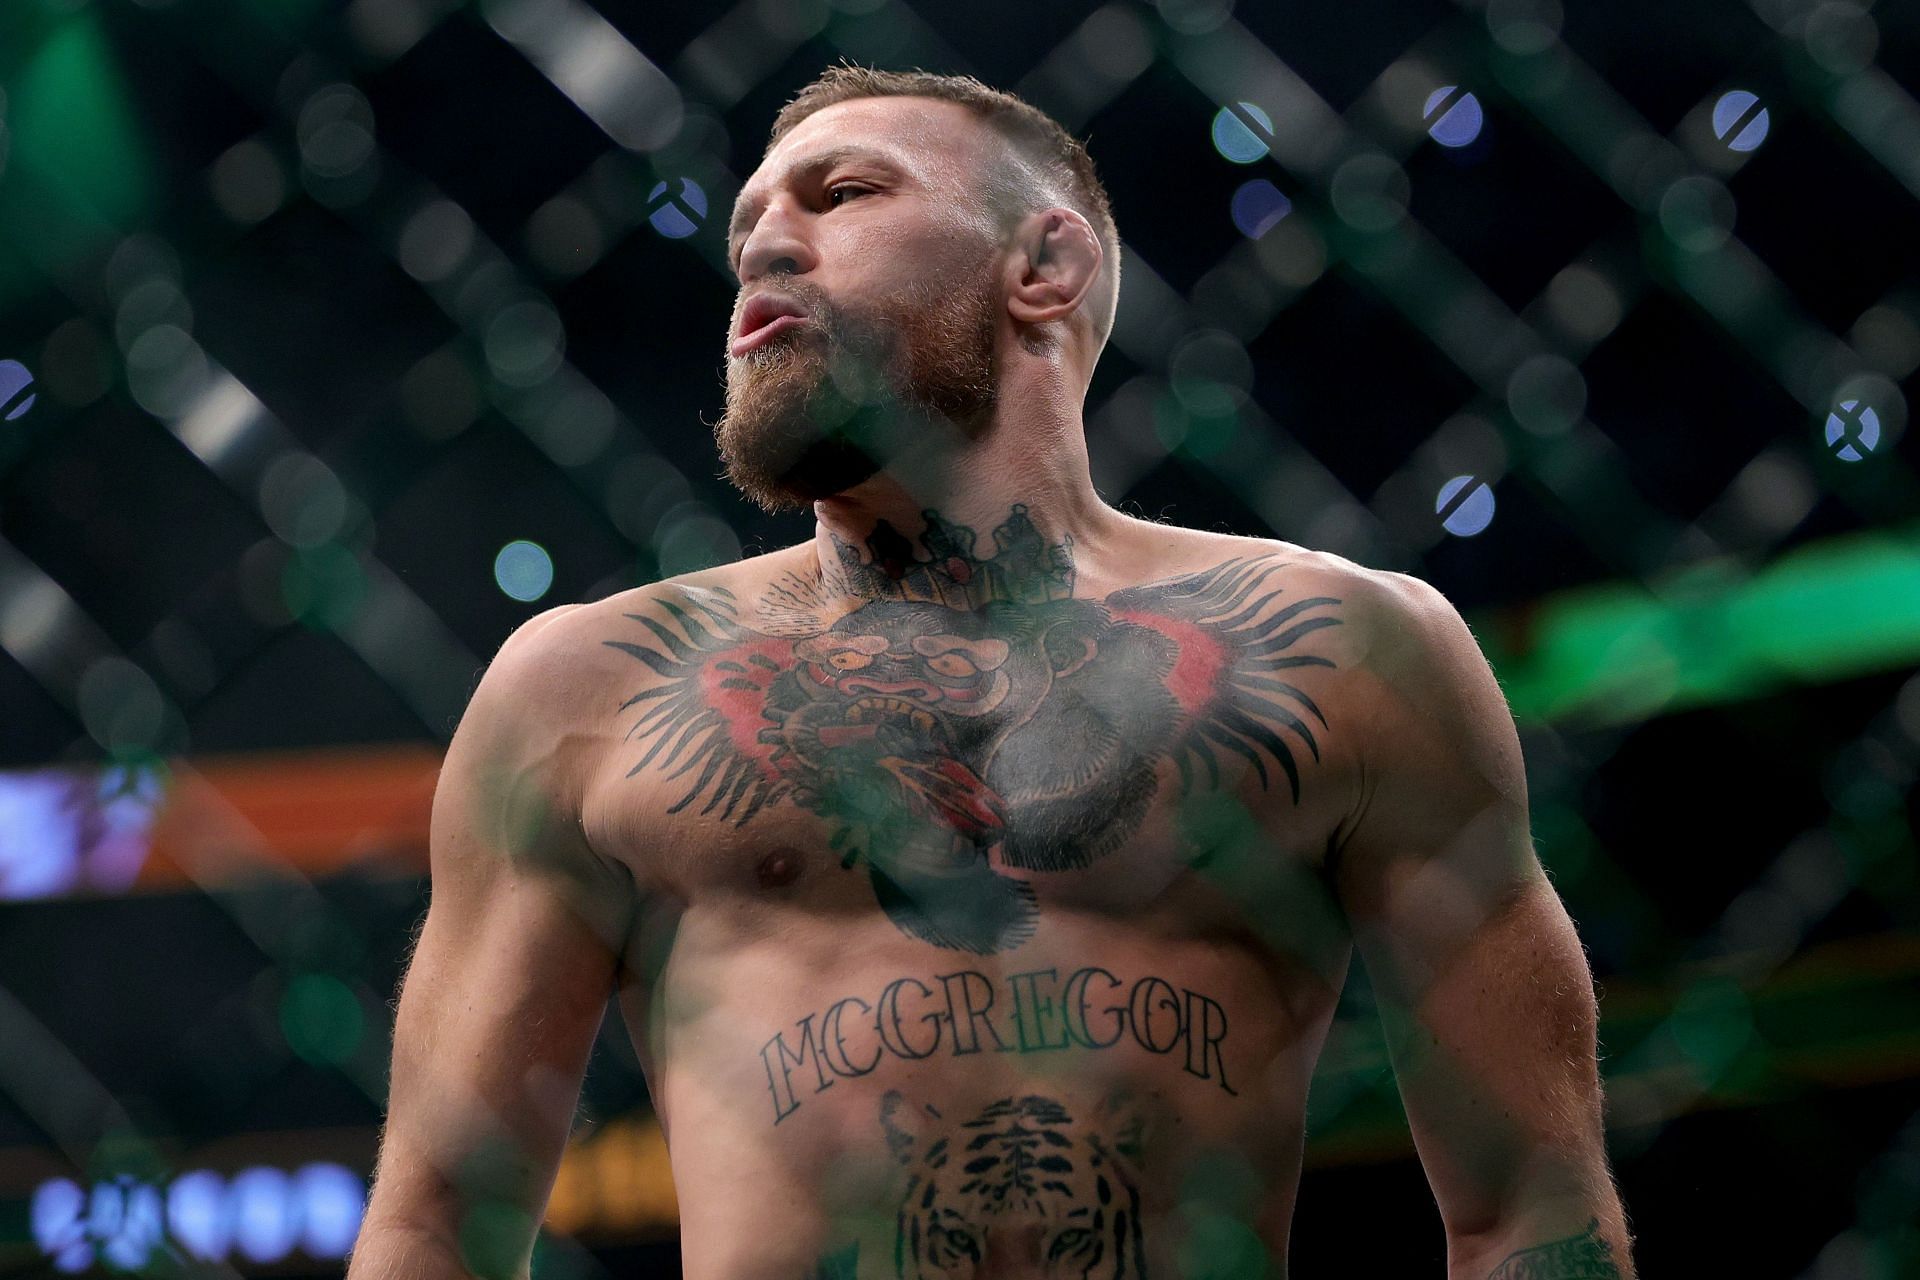 McGregor claimed the top spot on Forbes 2020 highest paid athletes list